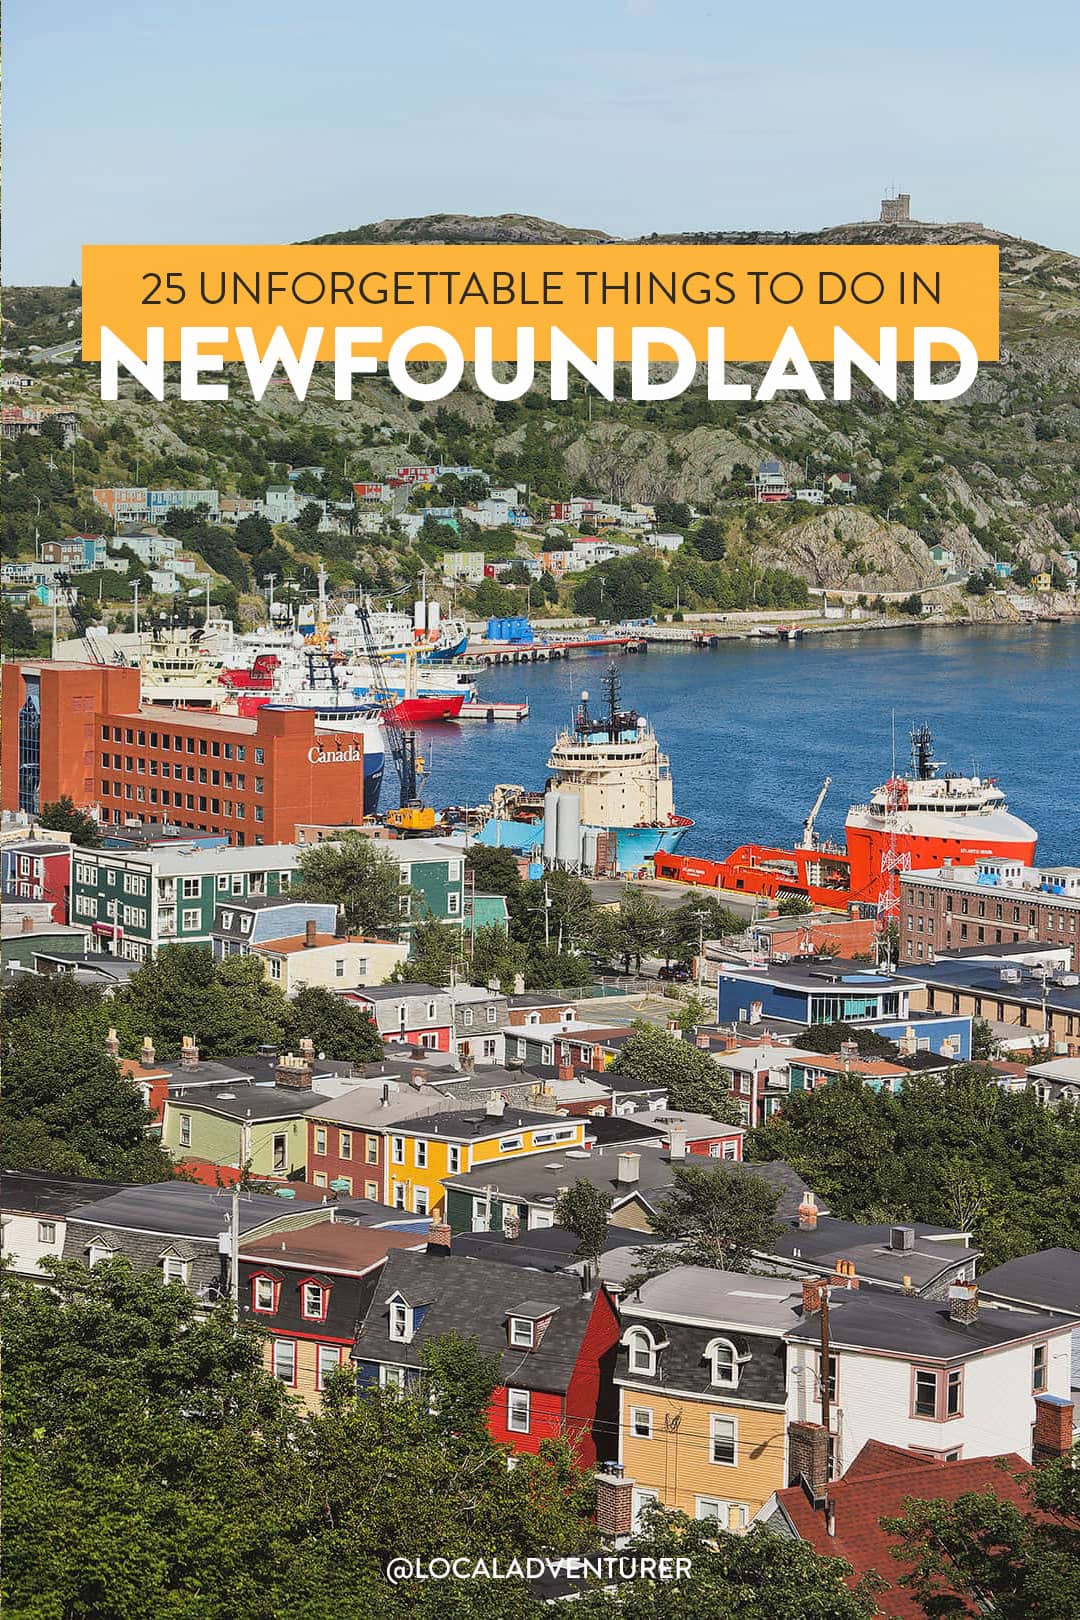 25 Unforgettable Things to Do in Newfoundland and Labrador